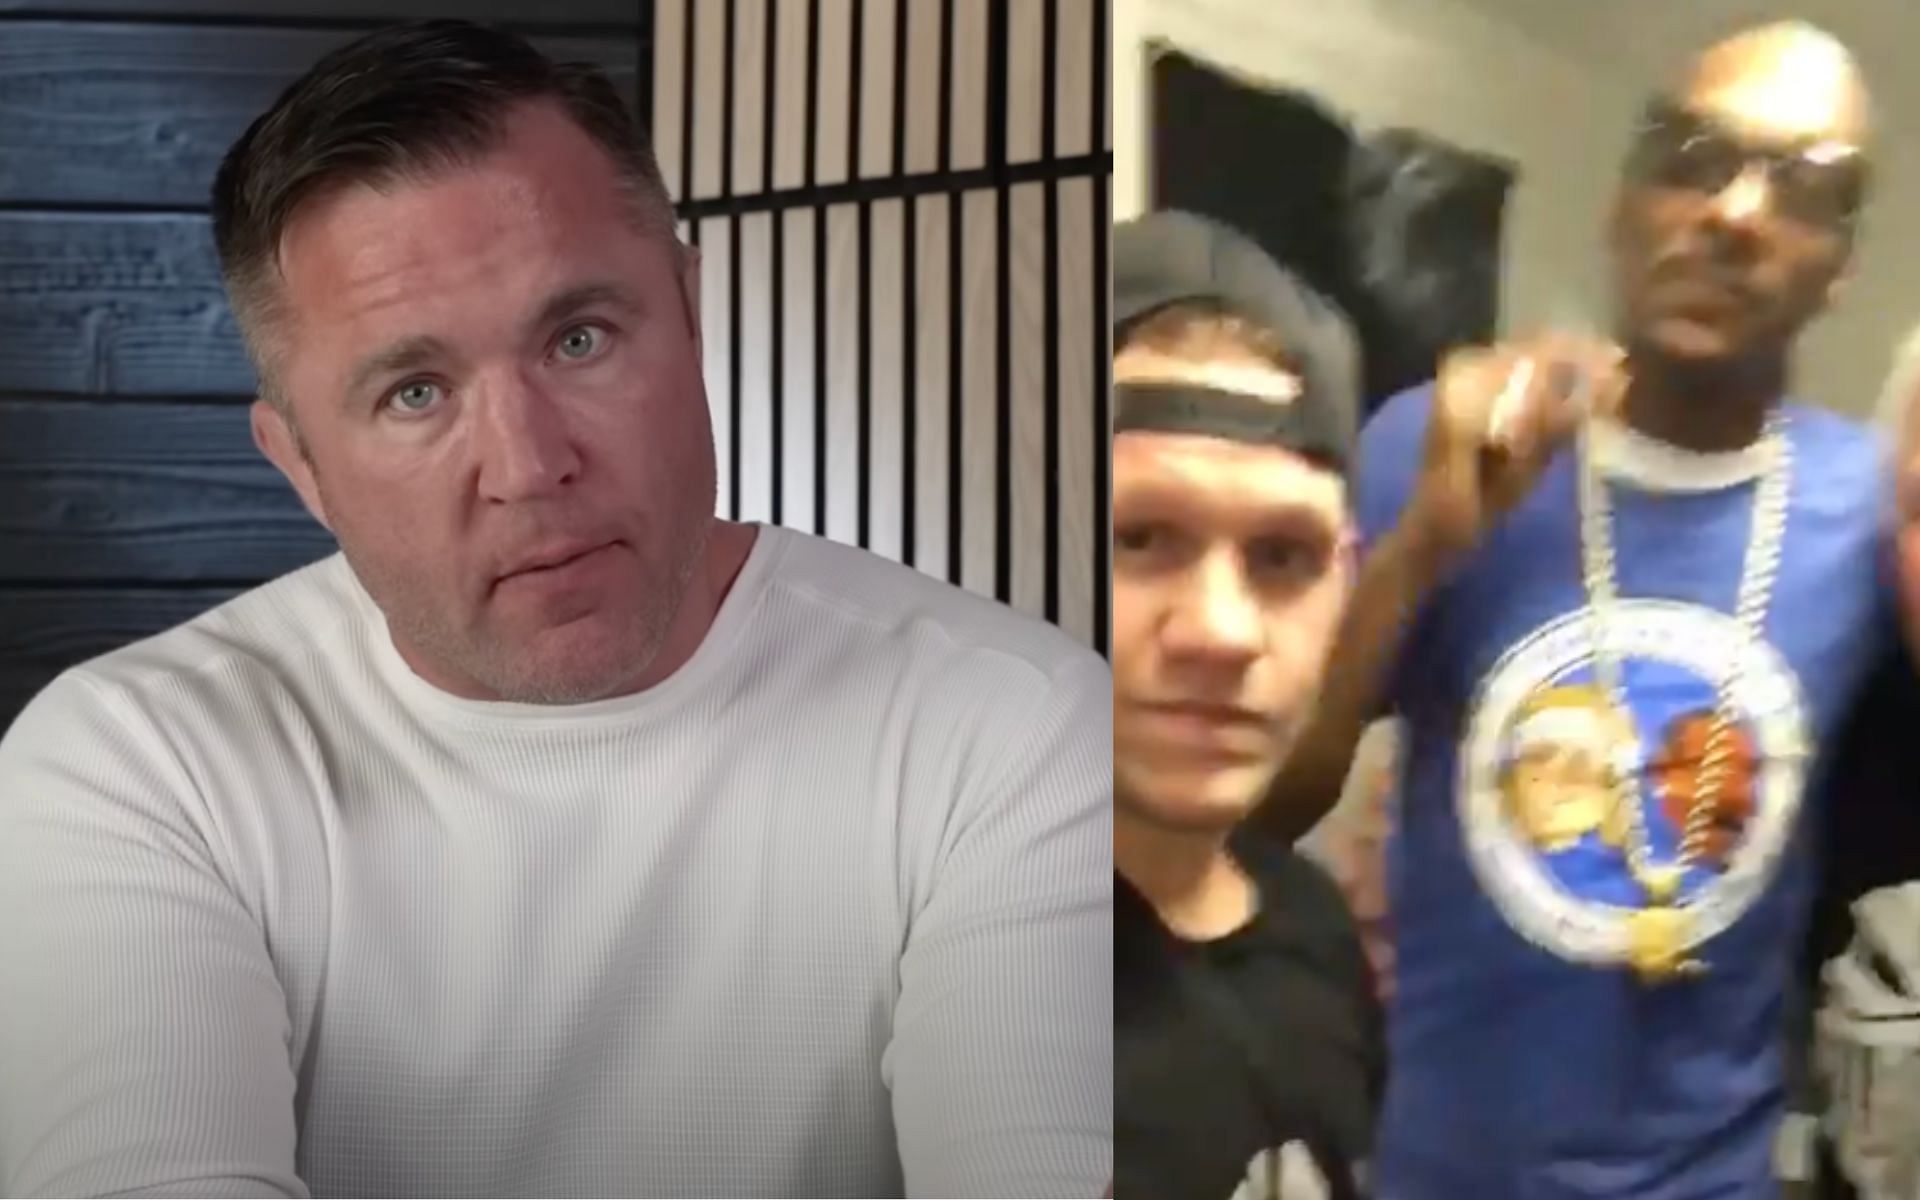 Chael Sonnen (left) and Chet McGet (right). [via YouTube Chael Sonnen and Twitter @CheezieMcfresh1]